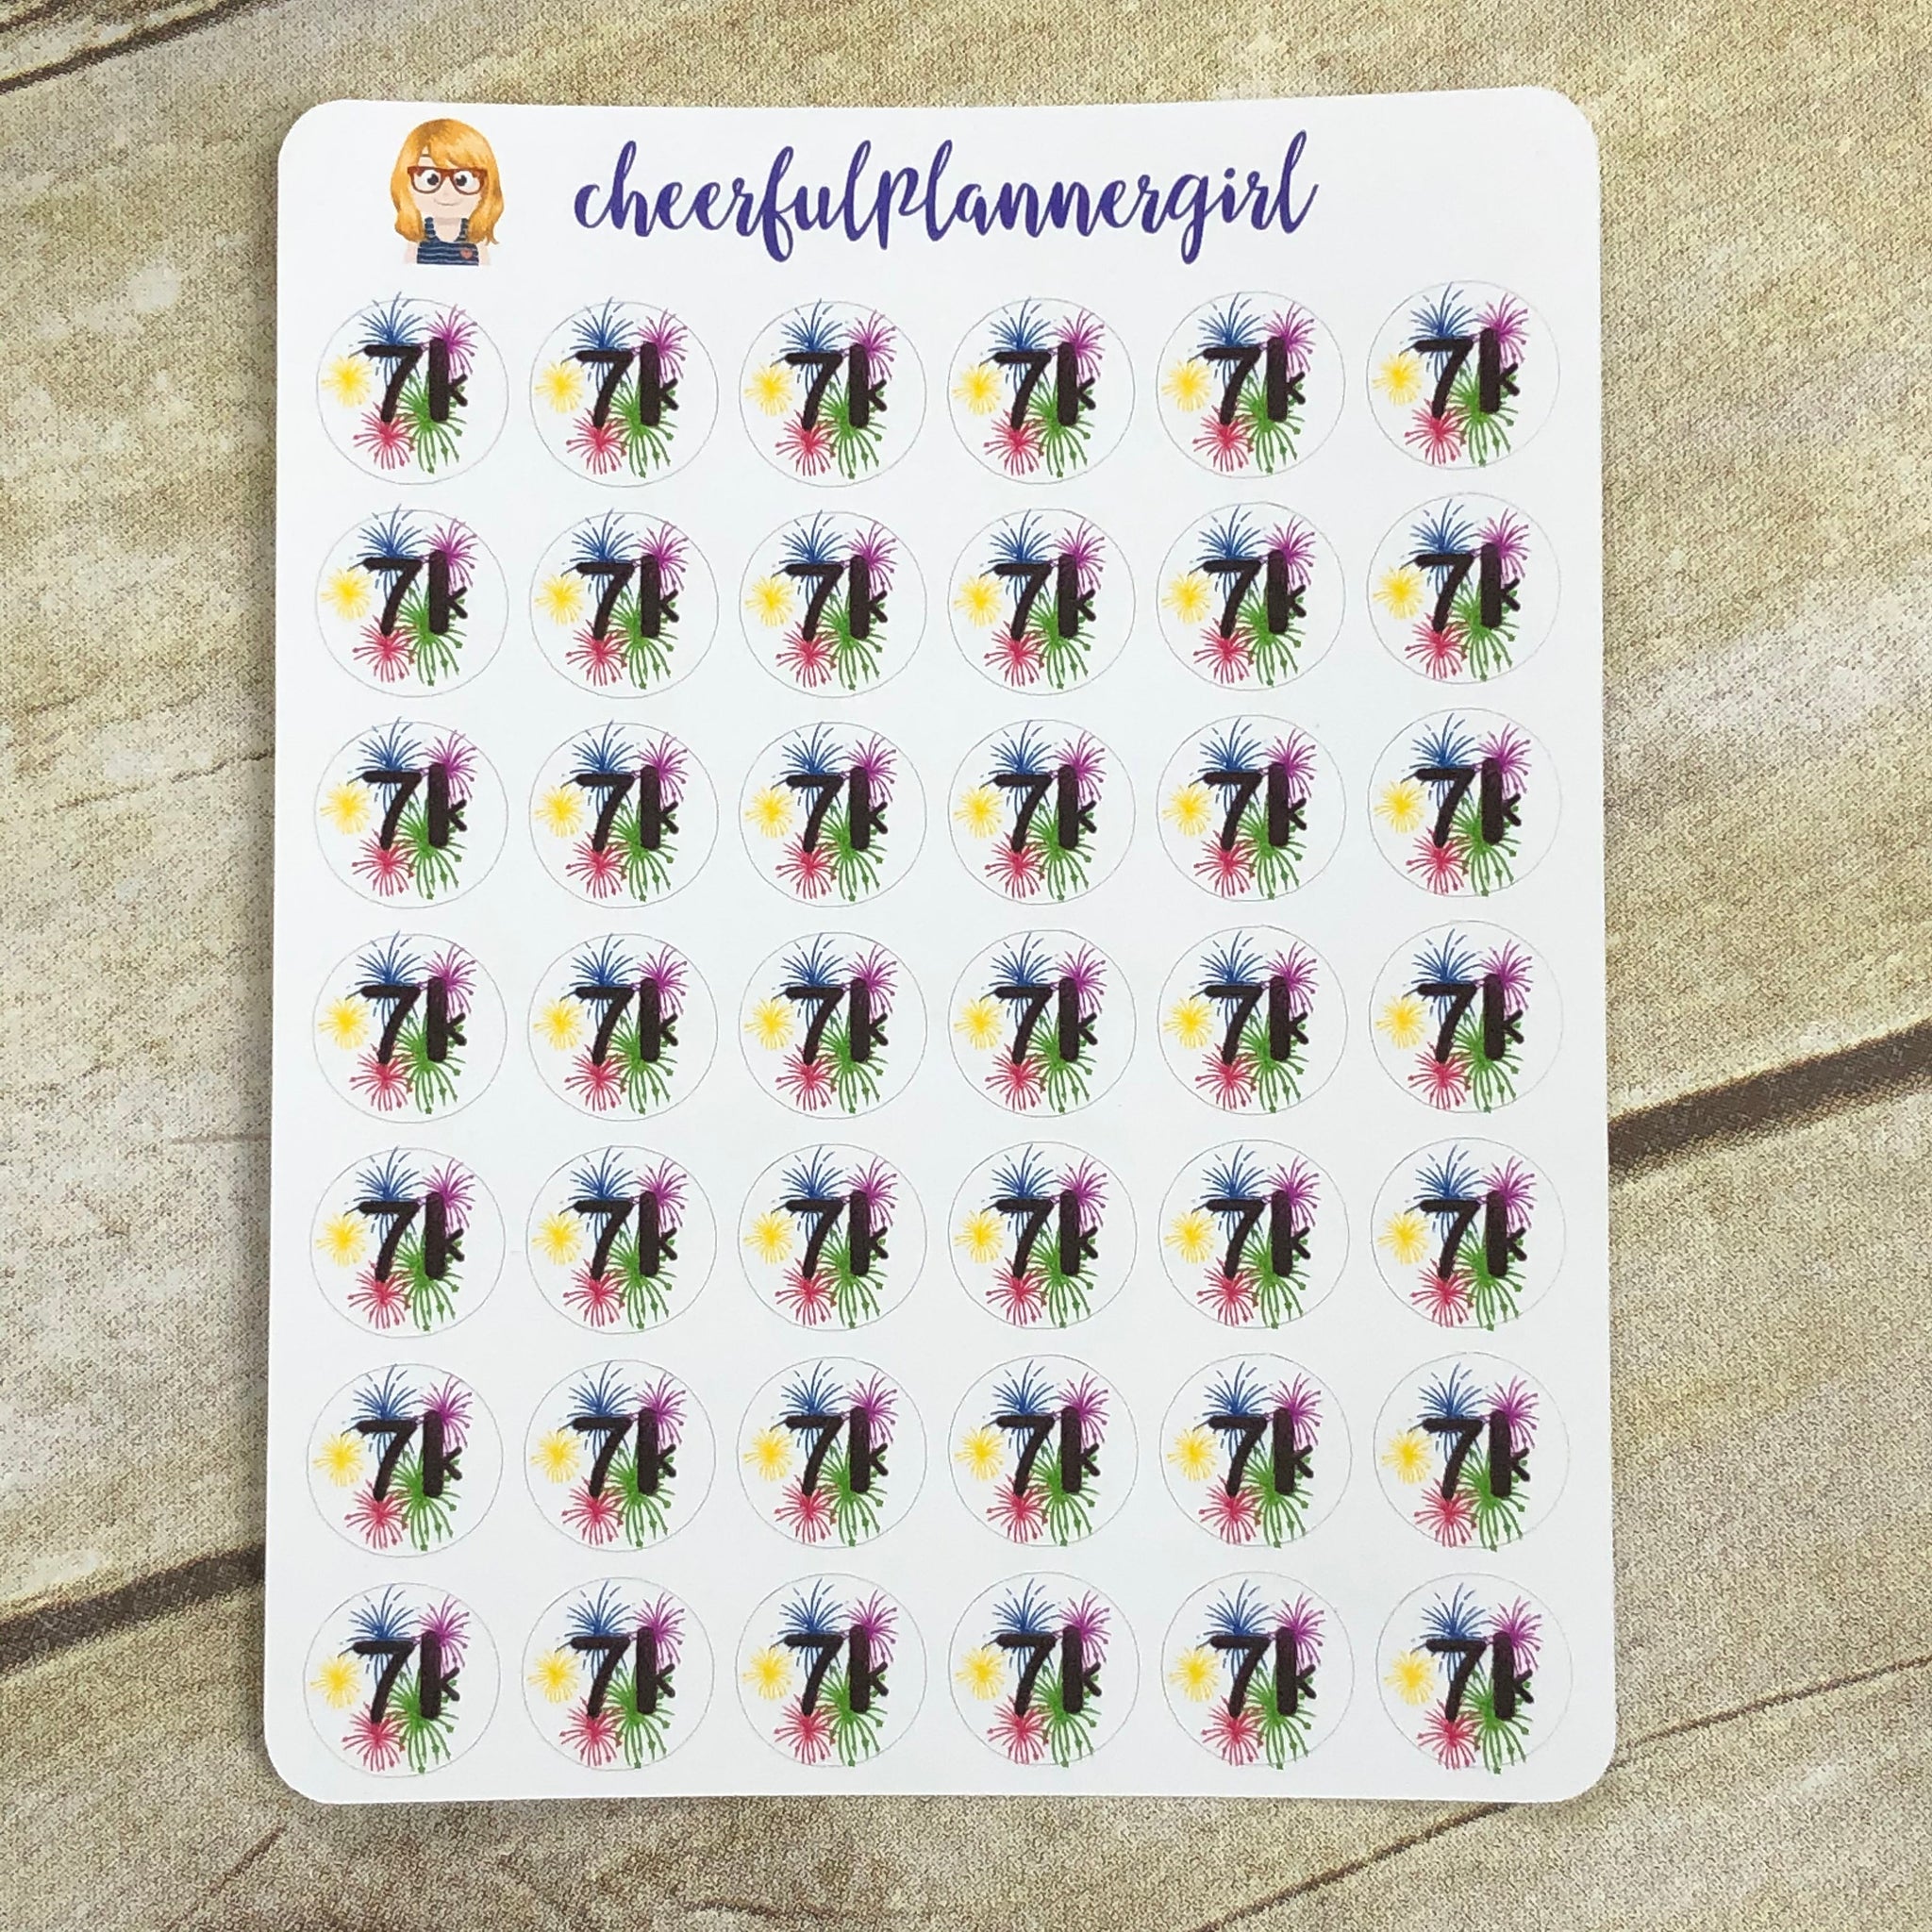 7k Step Goal Planner Stickers